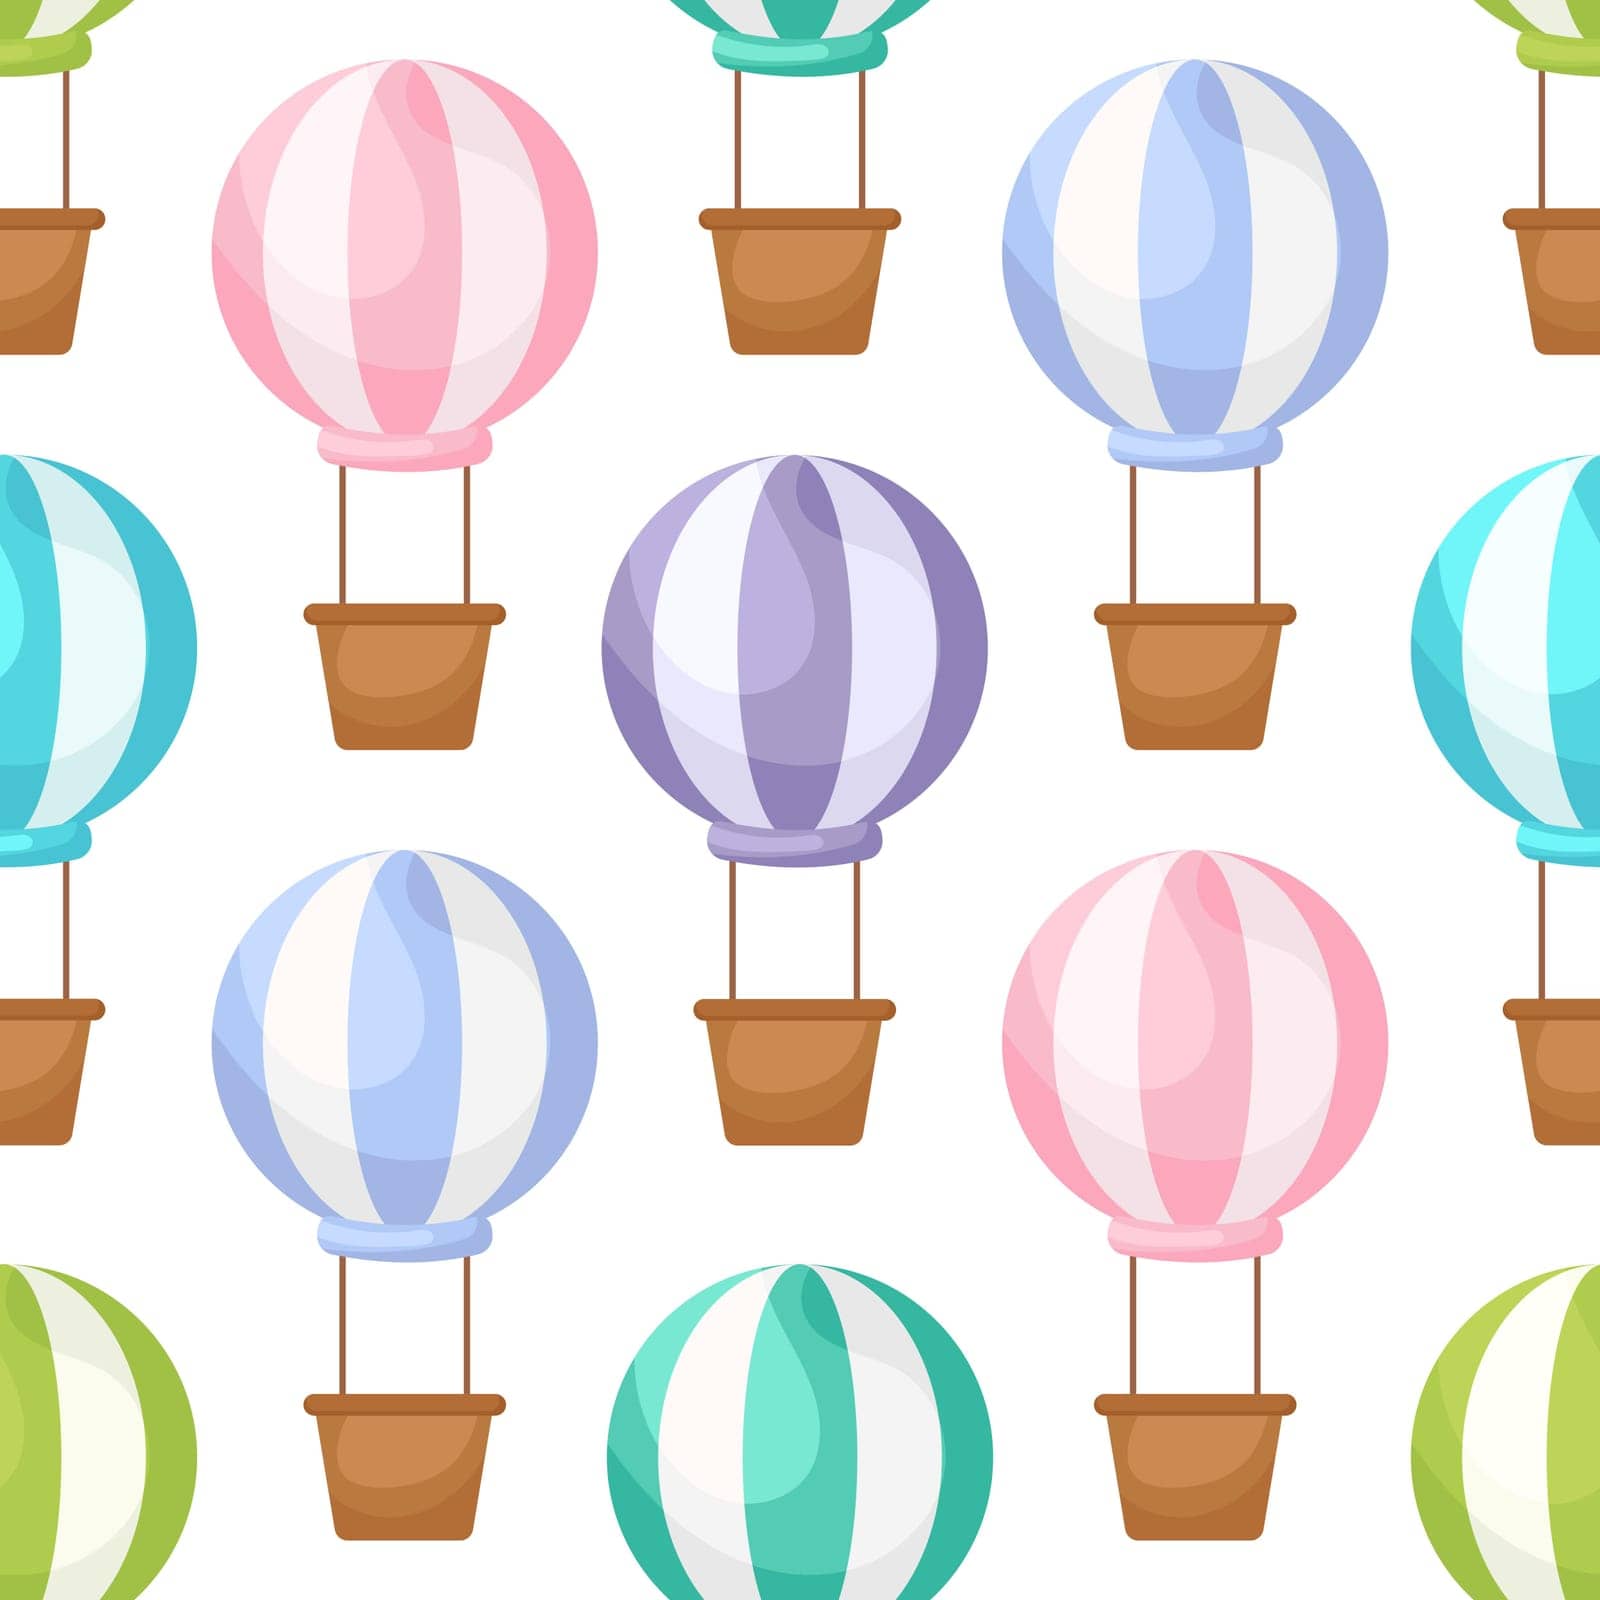 Cute children's seamless pattern with hot air balloons. Creative kids texture for fabric, wrapping, textile, wallpaper, apparel. Vector illustration by Melnyk